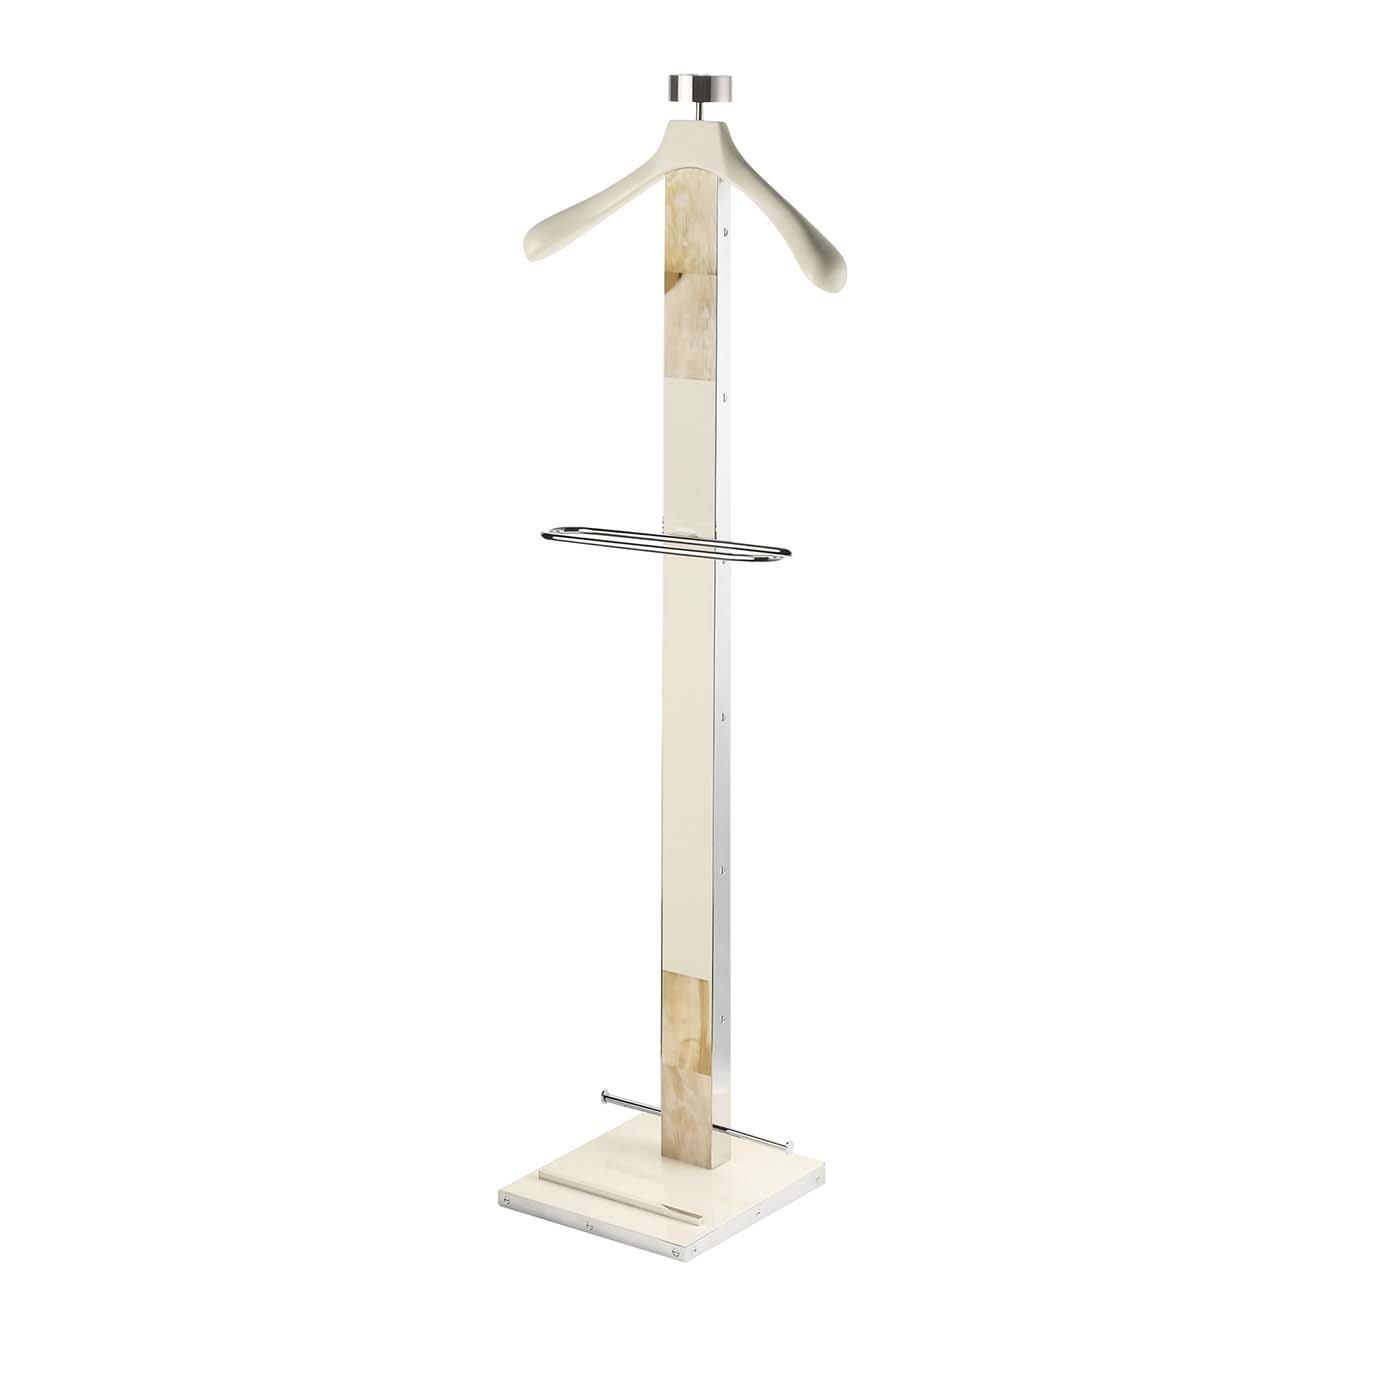 Levanzo Valet Stand - Main view